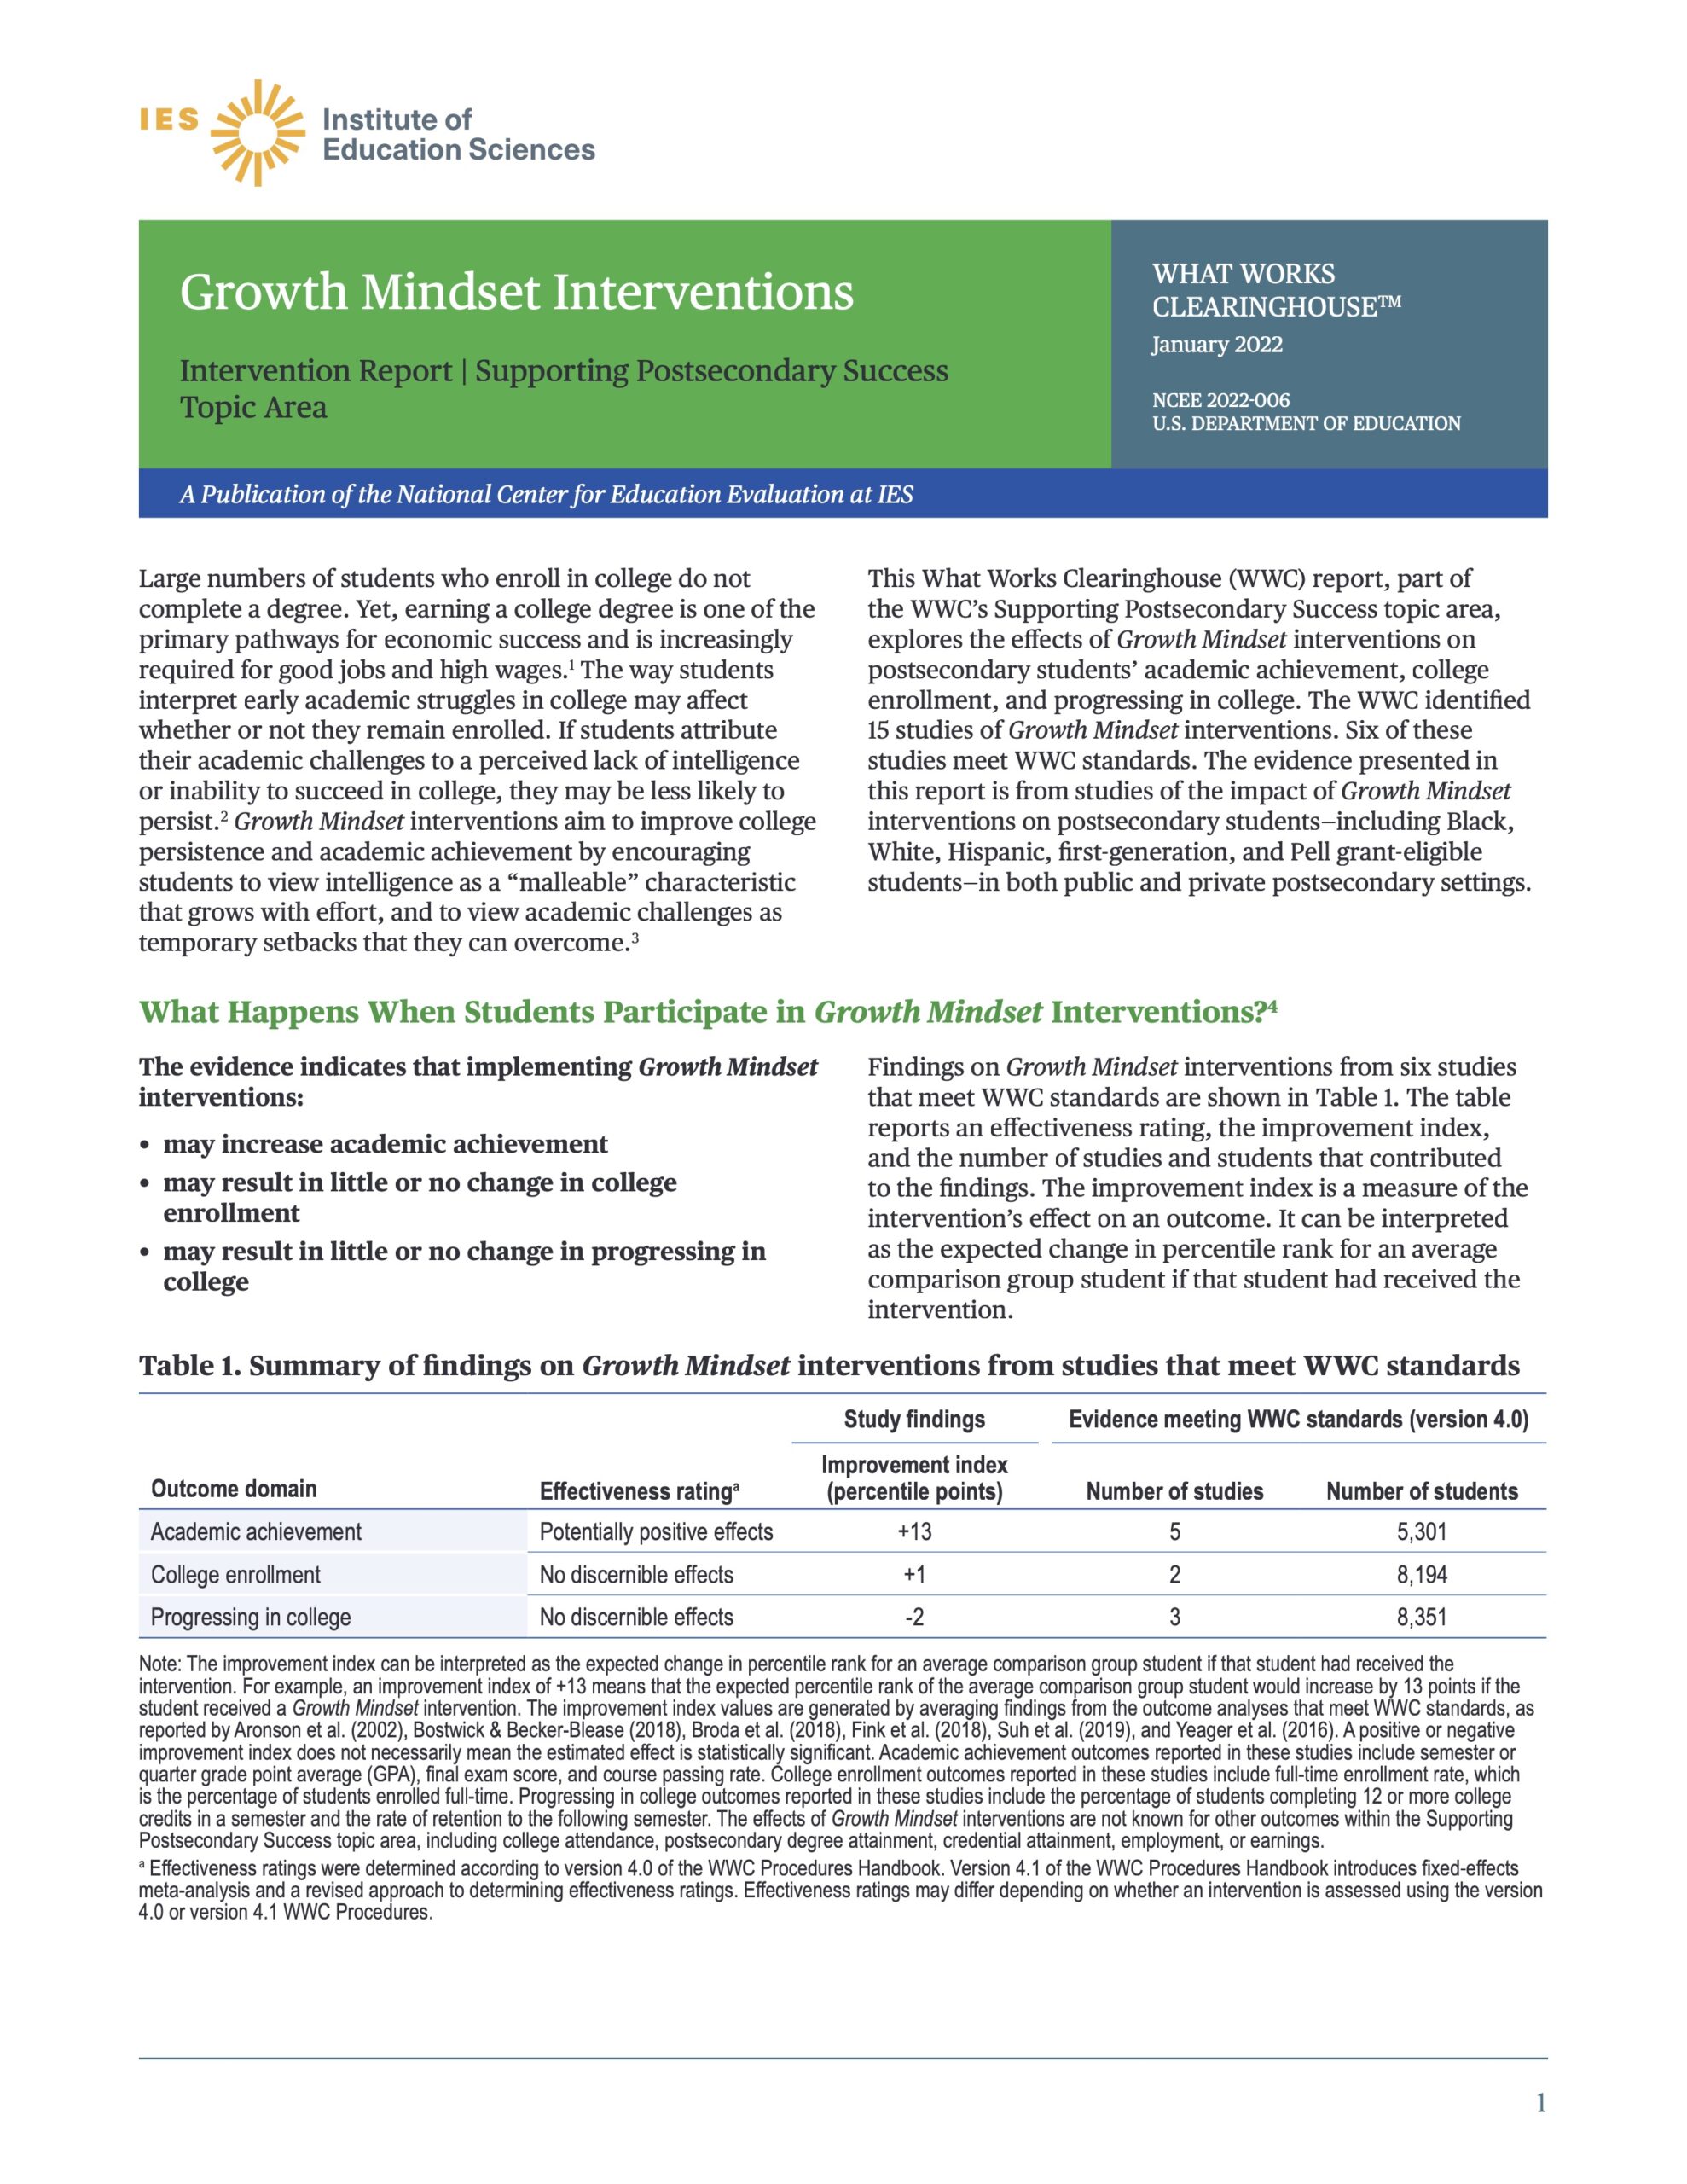 Thumbnail of cover: Intervention Report: Growth Mindset Interventions